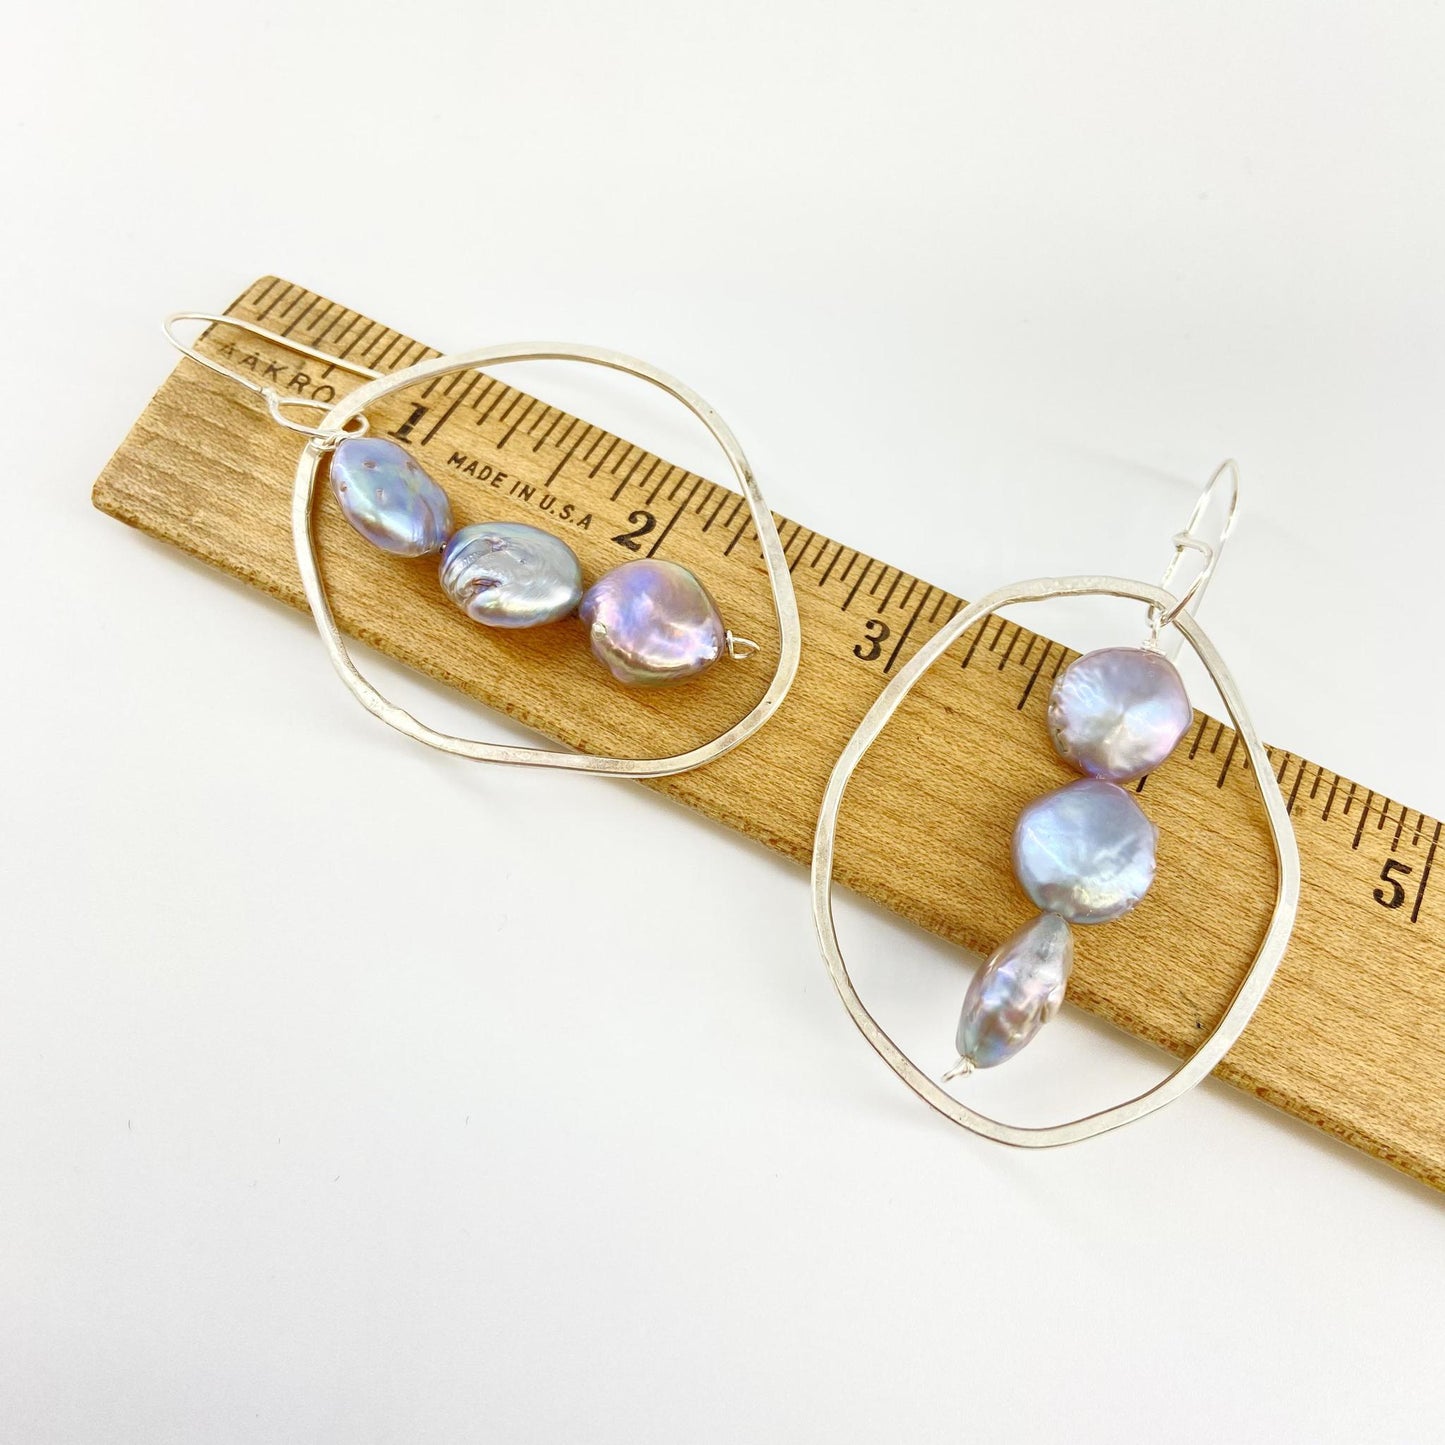 Earrings - Stacked Pearls in Sterling Ovals - Sterling Originals